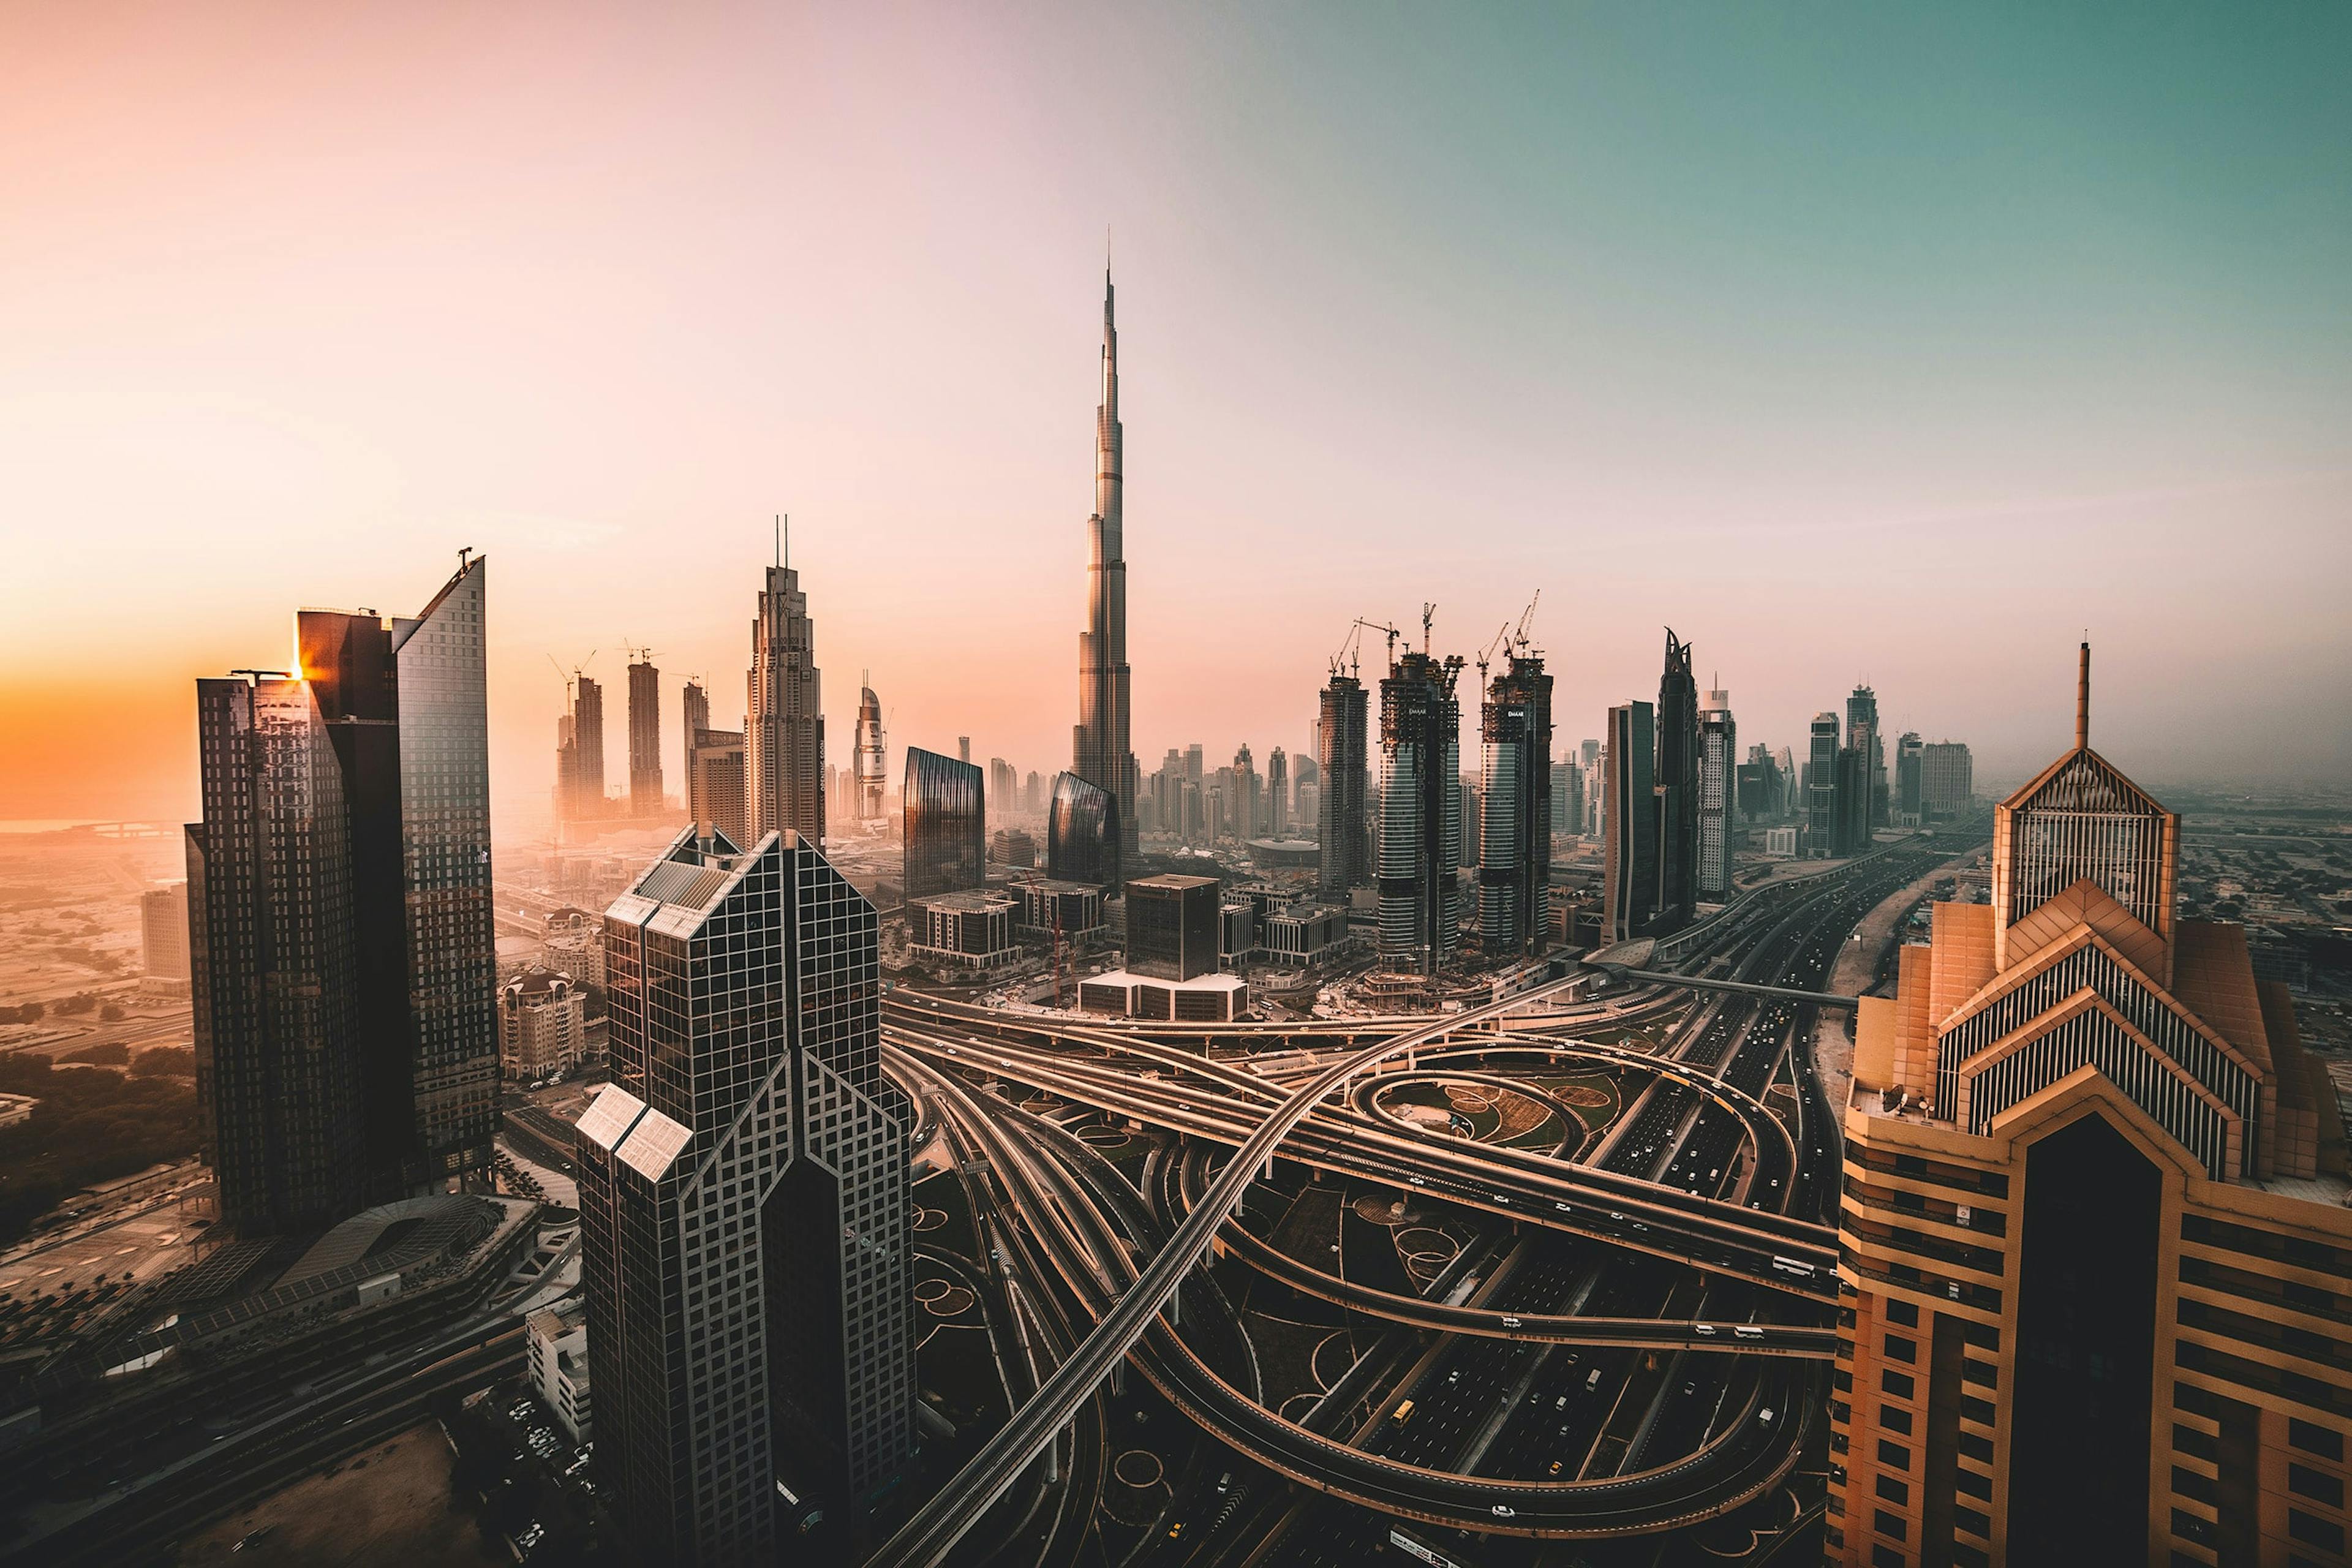 Dubai is the destination for the digital assets industry